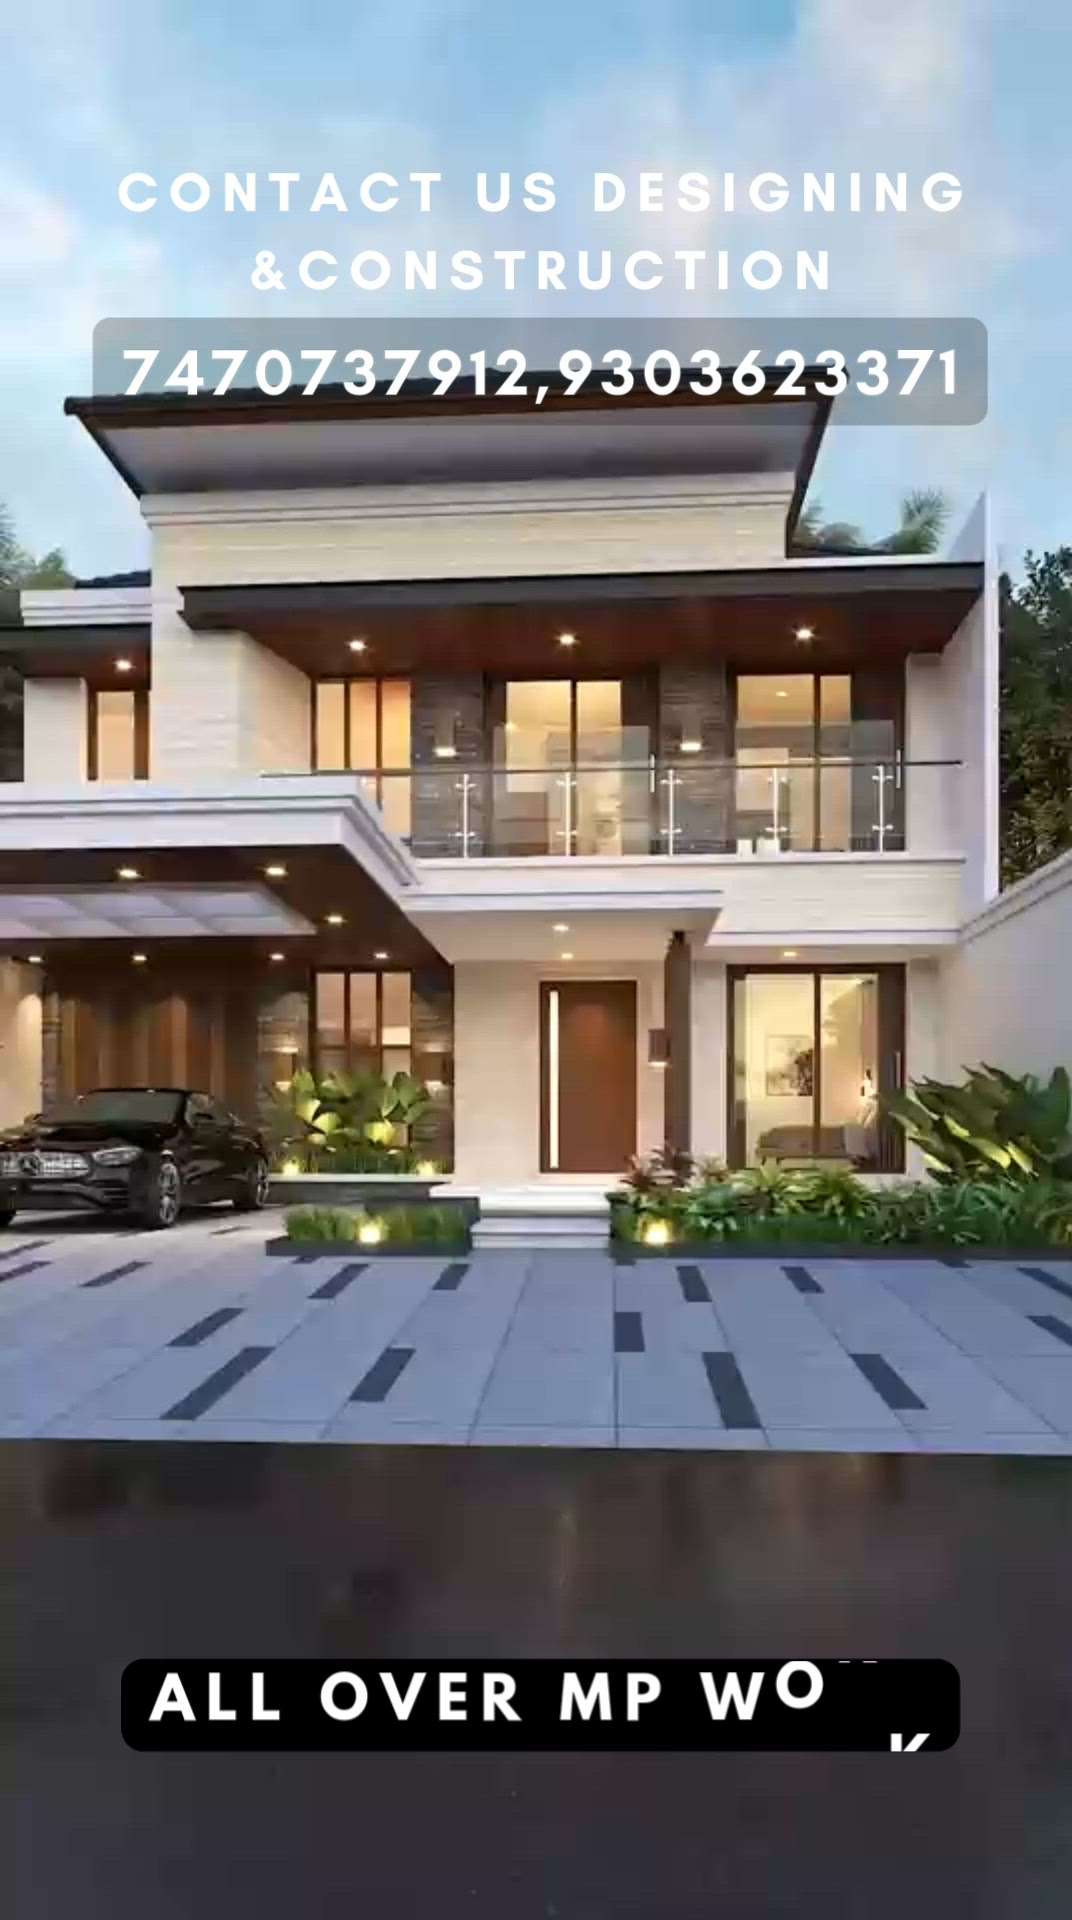 Hello, Guys I'm an architect and I provide Planning, interior design, draughting, 2D & 3D work, Elevation & Renders and other services. where you get best quality of work and drawings. If you have work for me direct message(DM) me  #ElevationHome  #HouseDesigns  #ContemporaryHouse  #HouseDesigns  #3d  #render3d3d  #views  #architecturedesigns  #CivilEngineer  #houseplanning  #30x60houseplan  #ElevationHome  #homesweethome  #homedecorationideas  #2DPlans #2DoorWardrobe  #3hour3danimationchallenge #3dmodeling